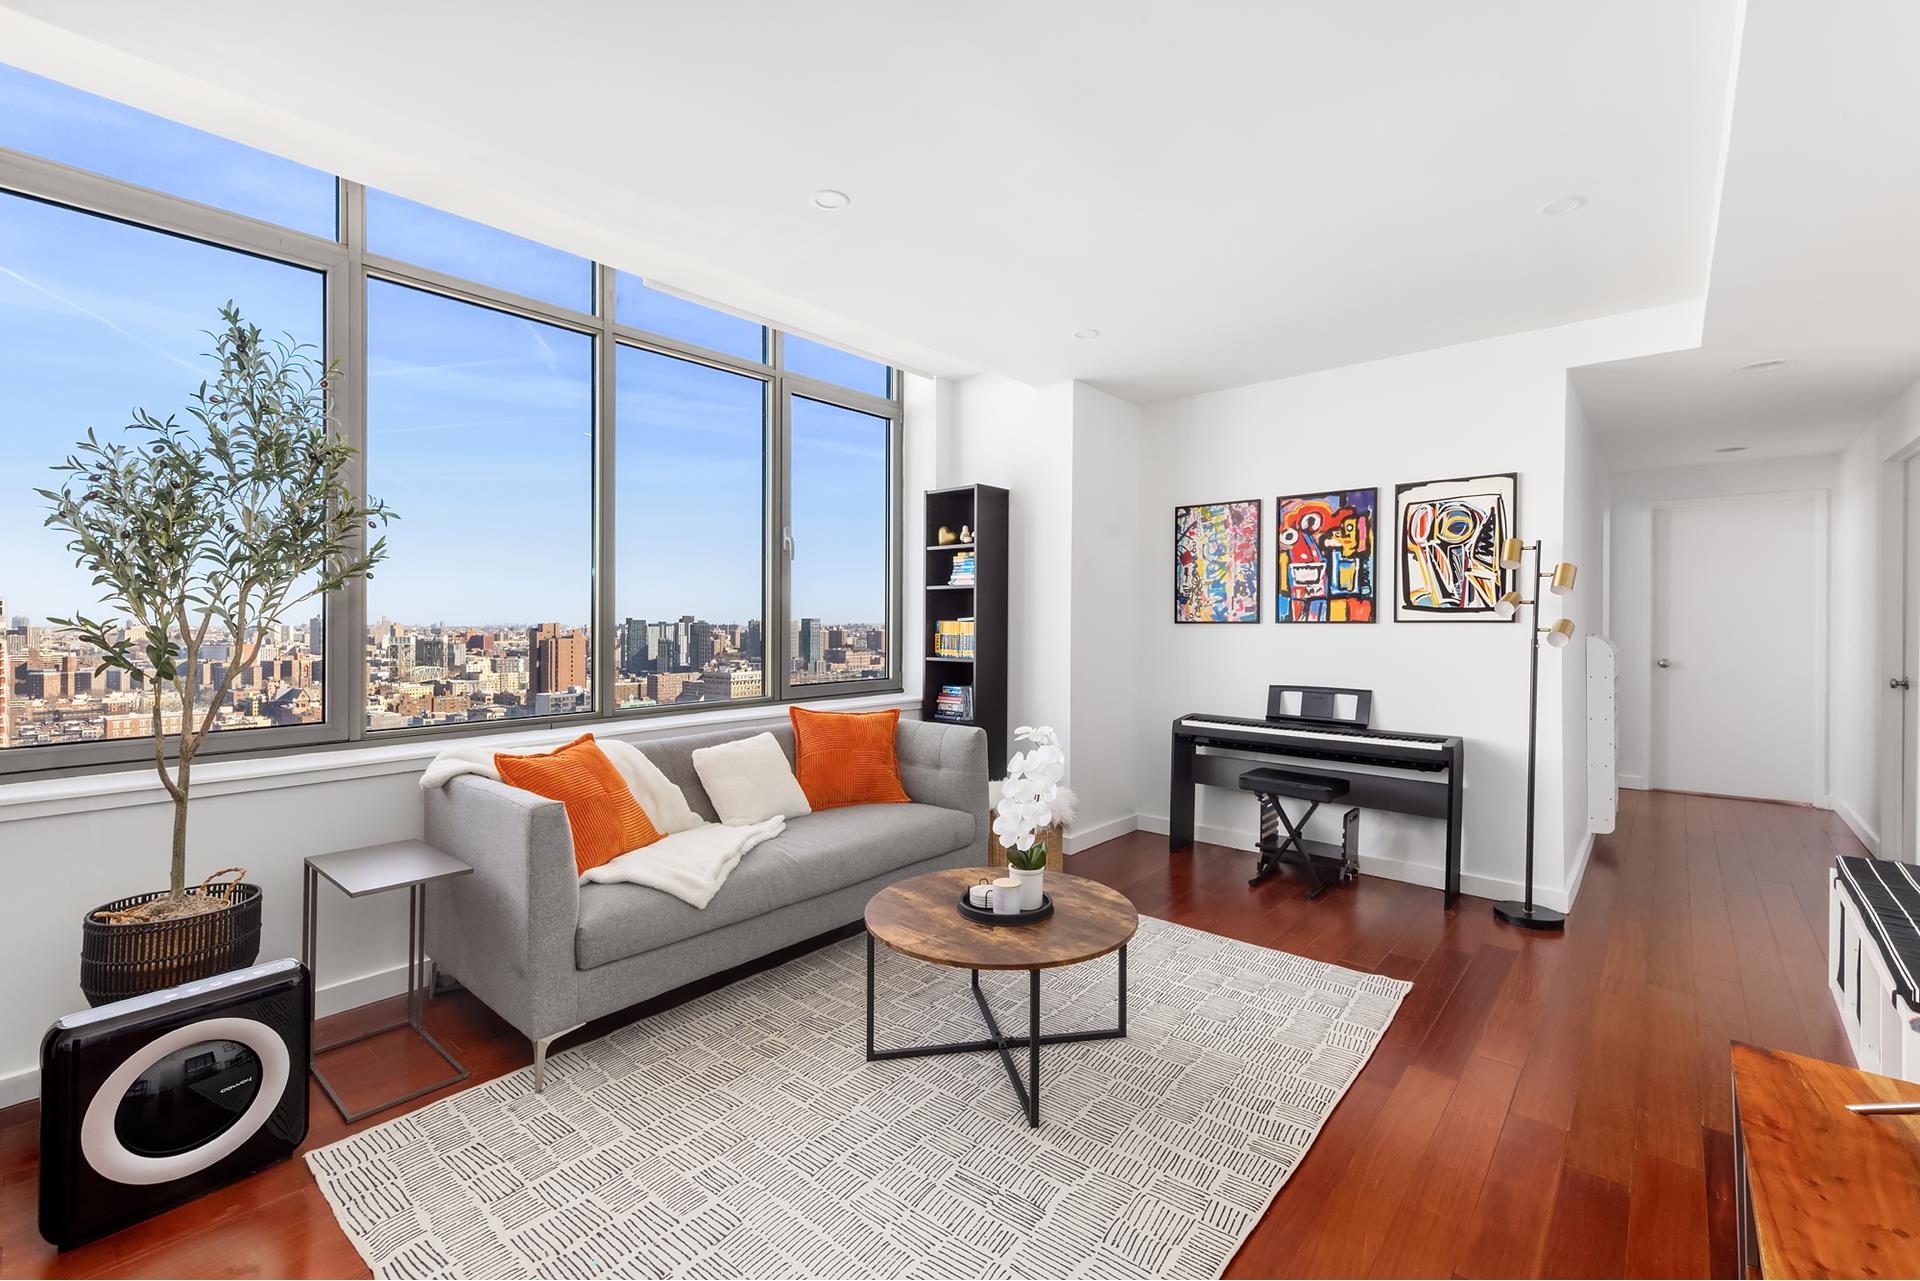 1485 5th Avenue 25A, South Harlem, Upper Manhattan, NYC - 2 Bedrooms  
2 Bathrooms  
5 Rooms - 